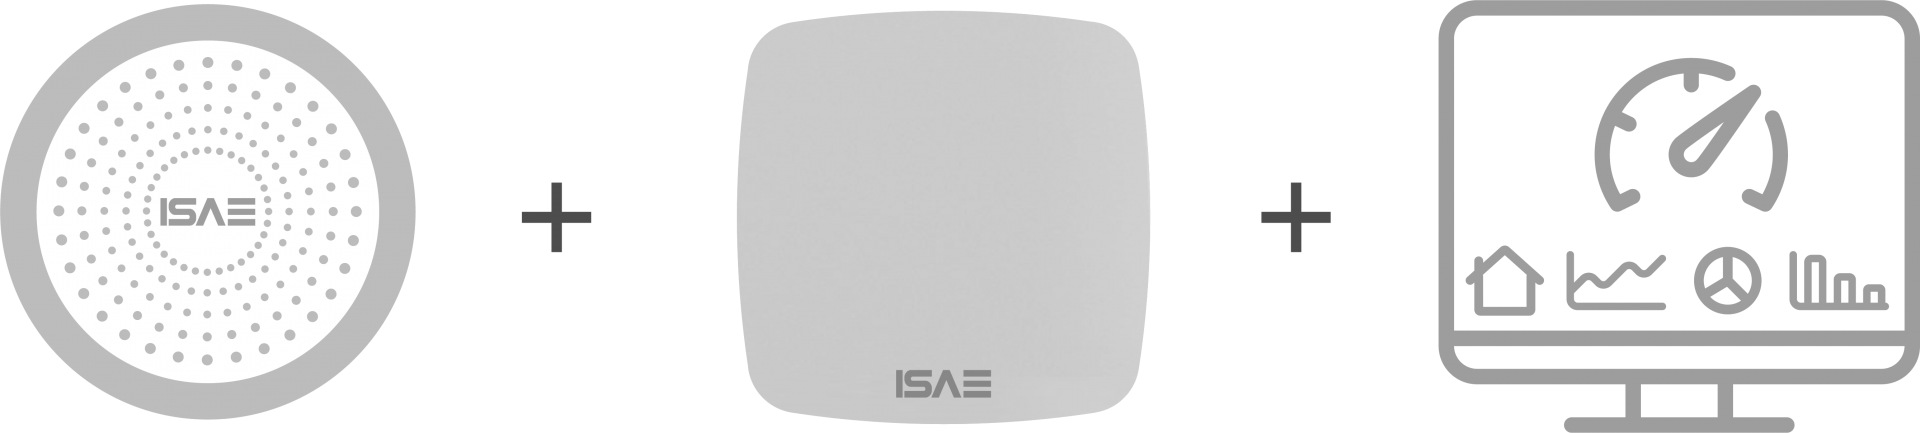 how isae iot works